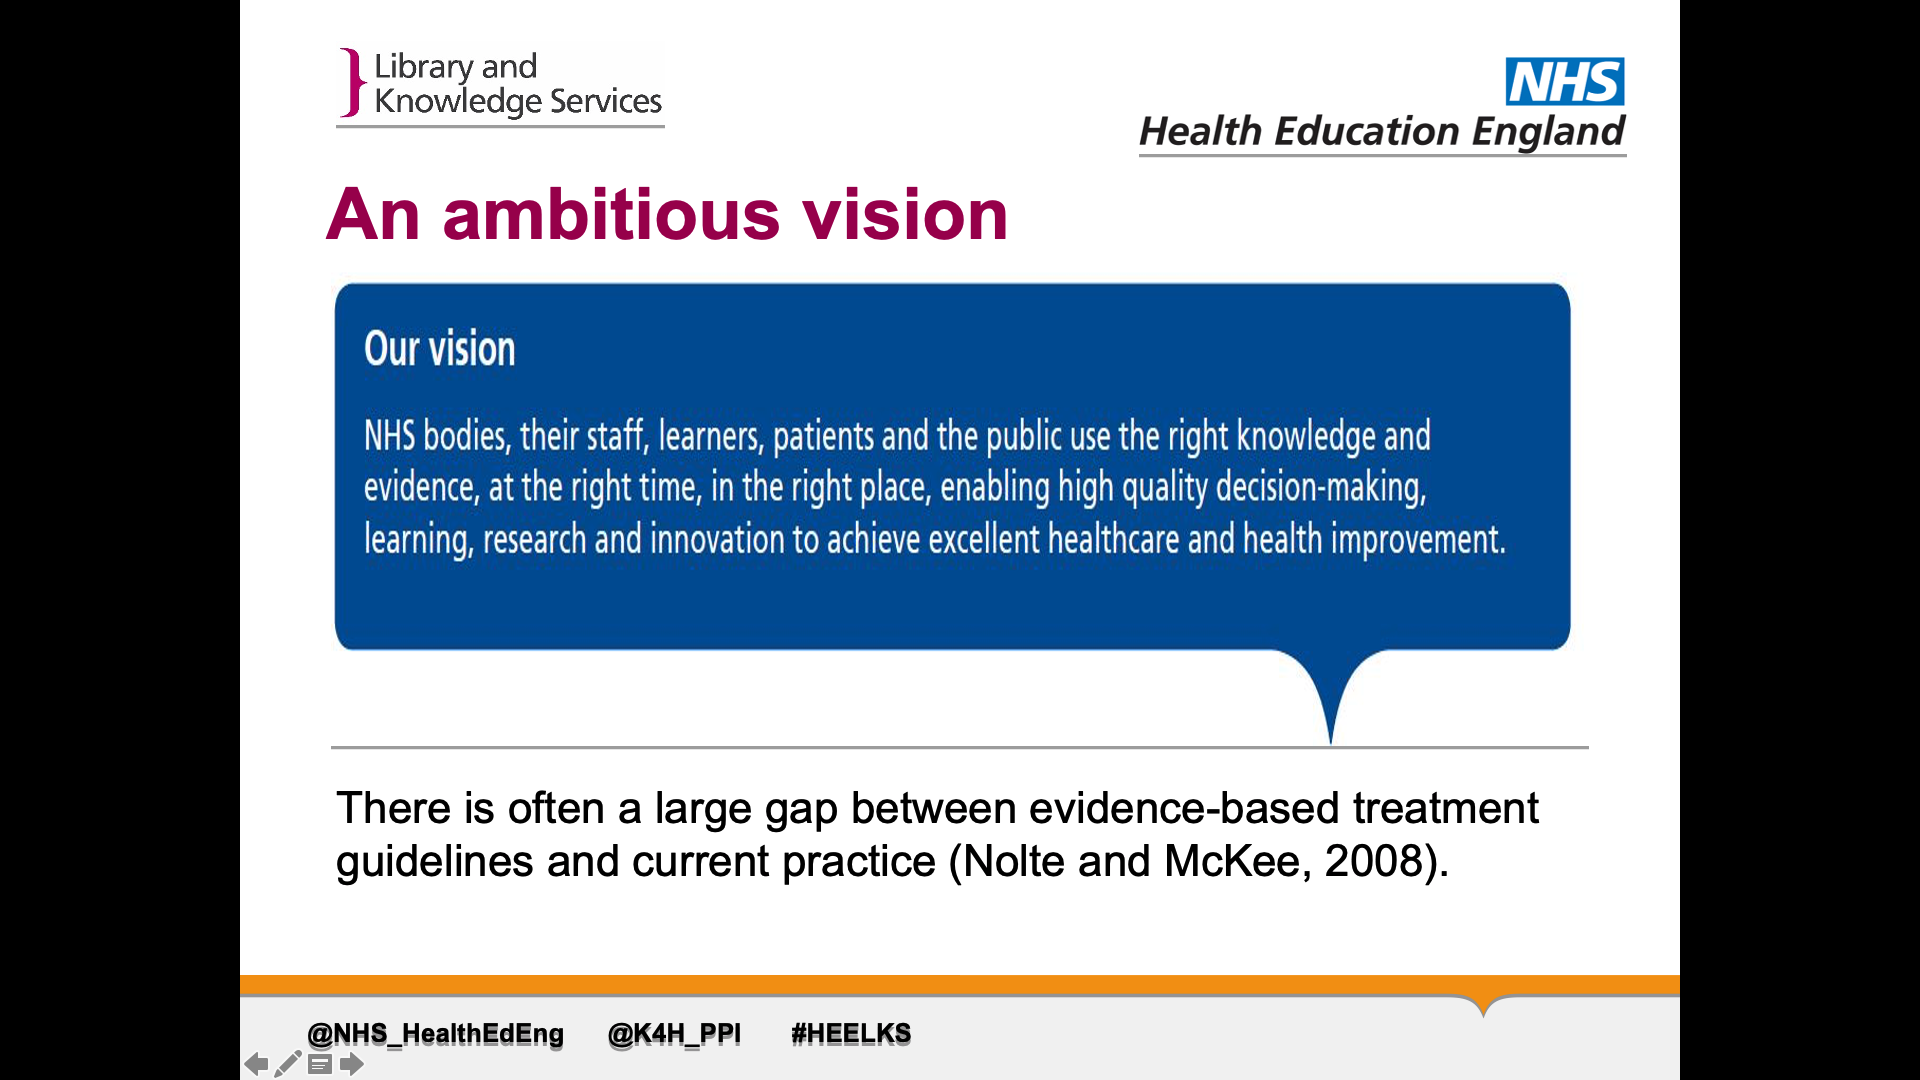 Title: An ambitious vision. Text on page: Our vision- NHS bodies, their staff, learners, patients and the public use the right knowledge and evidence, at the right time, in the right place, enabling high quality decision-making, learning, research and innovation to achieve excellent healthcare and health improvement. There is often a large gap between evidence-based treatment guidelines and current practice (Nolte and McKee, 2008)